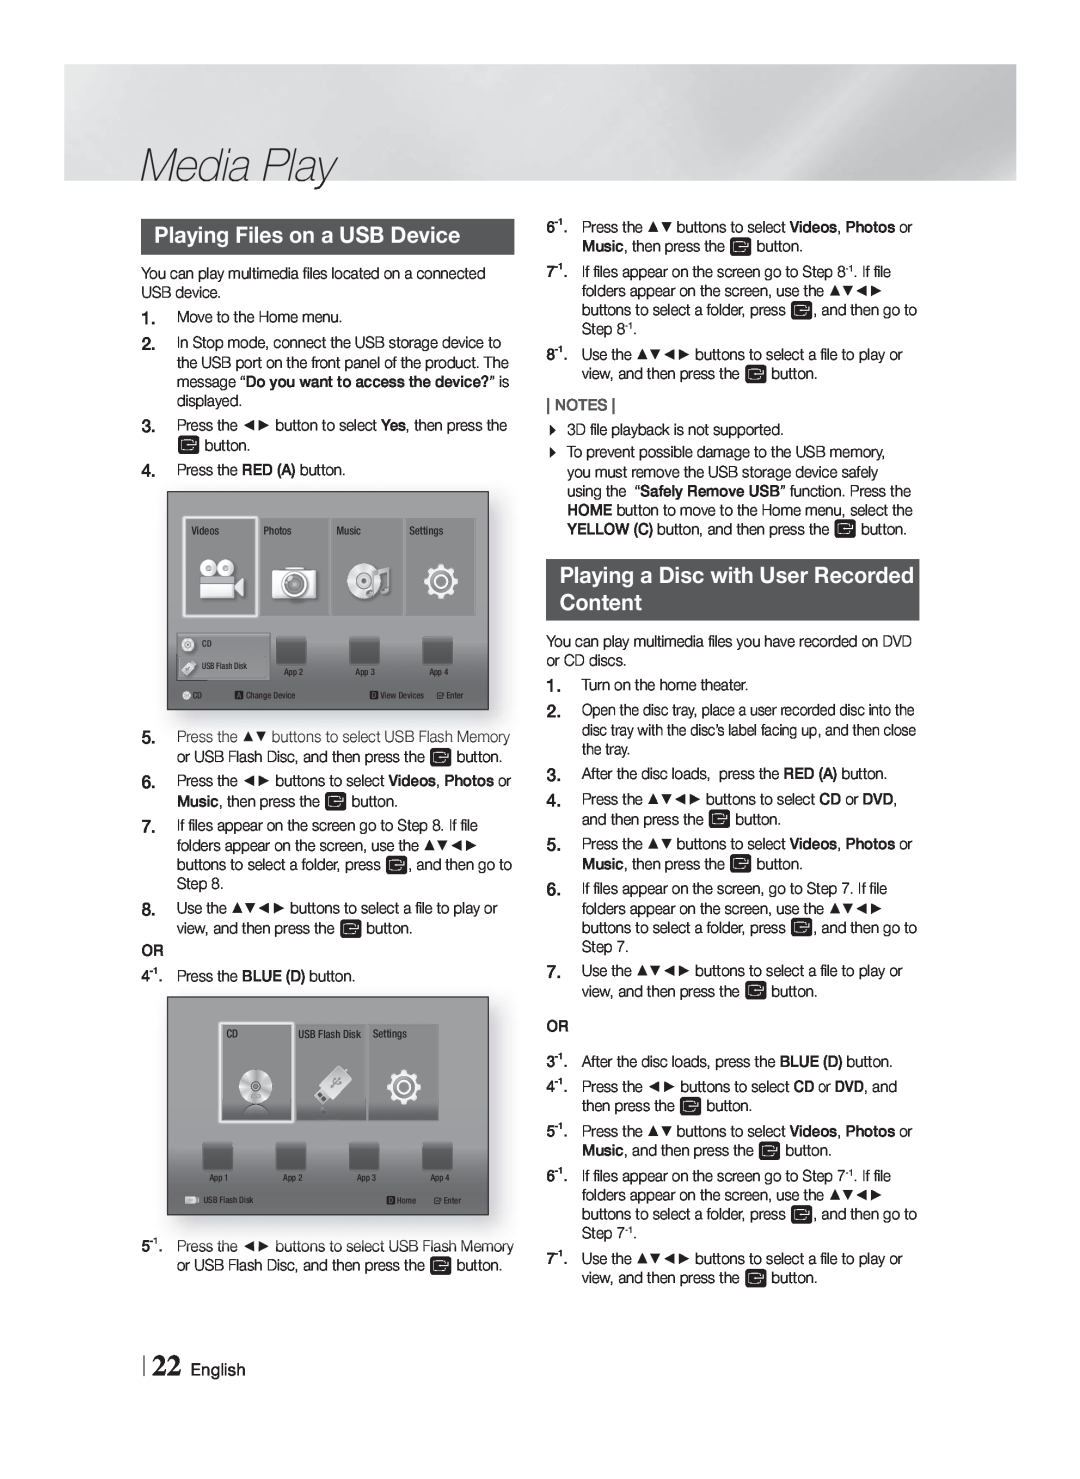 Samsung HTF4500ZA user manual Media Play, Playing Files on a USB Device, Playing a Disc with User Recorded Content, English 